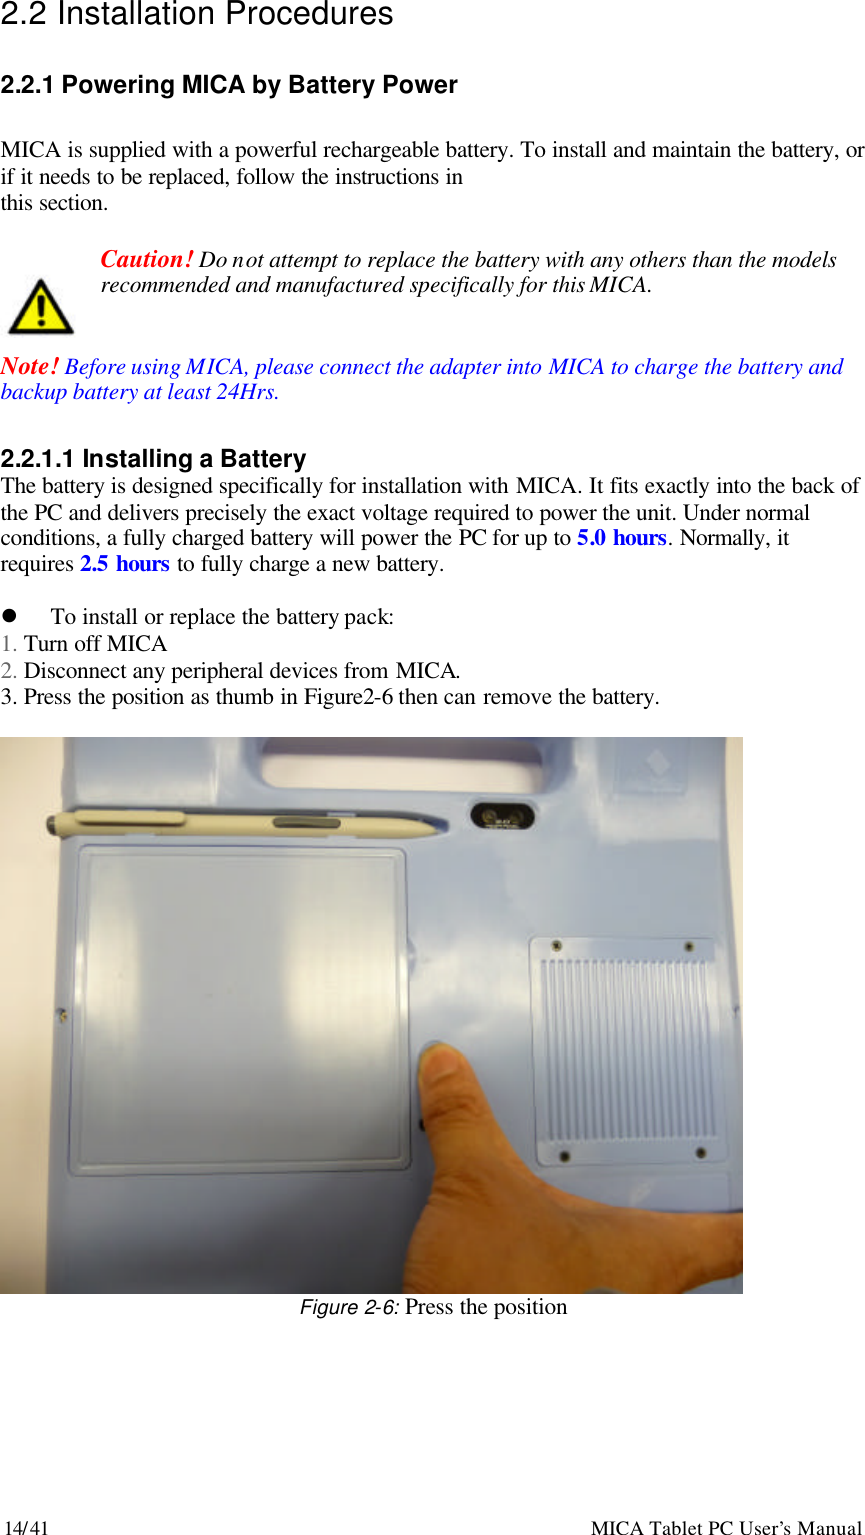 14/41                                                    MICA Tablet PC User’s Manual 2.2 Installation Procedures  2.2.1 Powering MICA by Battery Power  MICA is supplied with a powerful rechargeable battery. To install and maintain the battery, or if it needs to be replaced, follow the instructions in this section.    Caution! Do not attempt to replace the battery with any others than the models   recommended and manufactured specifically for this MICA.   Note! Before using MICA, please connect the adapter into MICA to charge the battery and backup battery at least 24Hrs.  2.2.1.1 Installing a Battery The battery is designed specifically for installation with MICA. It fits exactly into the back of the PC and delivers precisely the exact voltage required to power the unit. Under normal conditions, a fully charged battery will power the PC for up to 5.0 hours. Normally, it requires 2.5 hours to fully charge a new battery.  l To install or replace the battery pack:   1. Turn off MICA 2. Disconnect any peripheral devices from MICA. 3. Press the position as thumb in Figure2-6 then can remove the battery.   Figure 2-6: Press the position 